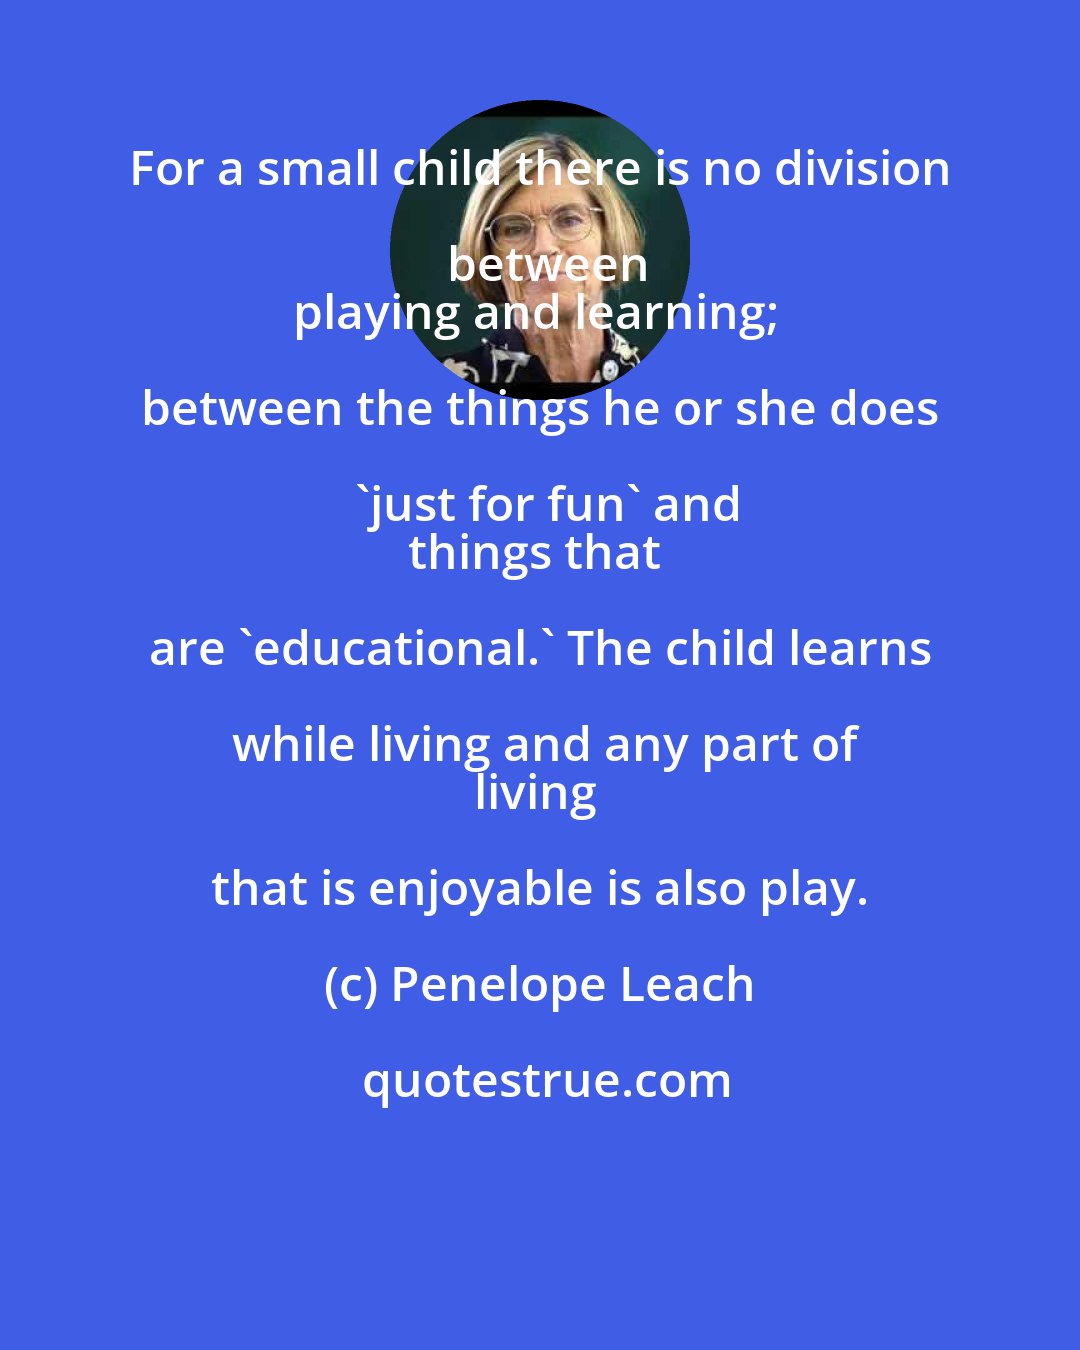 Penelope Leach: For a small child there is no division between
playing and learning; between the things he or she does 'just for fun' and
things that are 'educational.' The child learns while living and any part of
living that is enjoyable is also play.